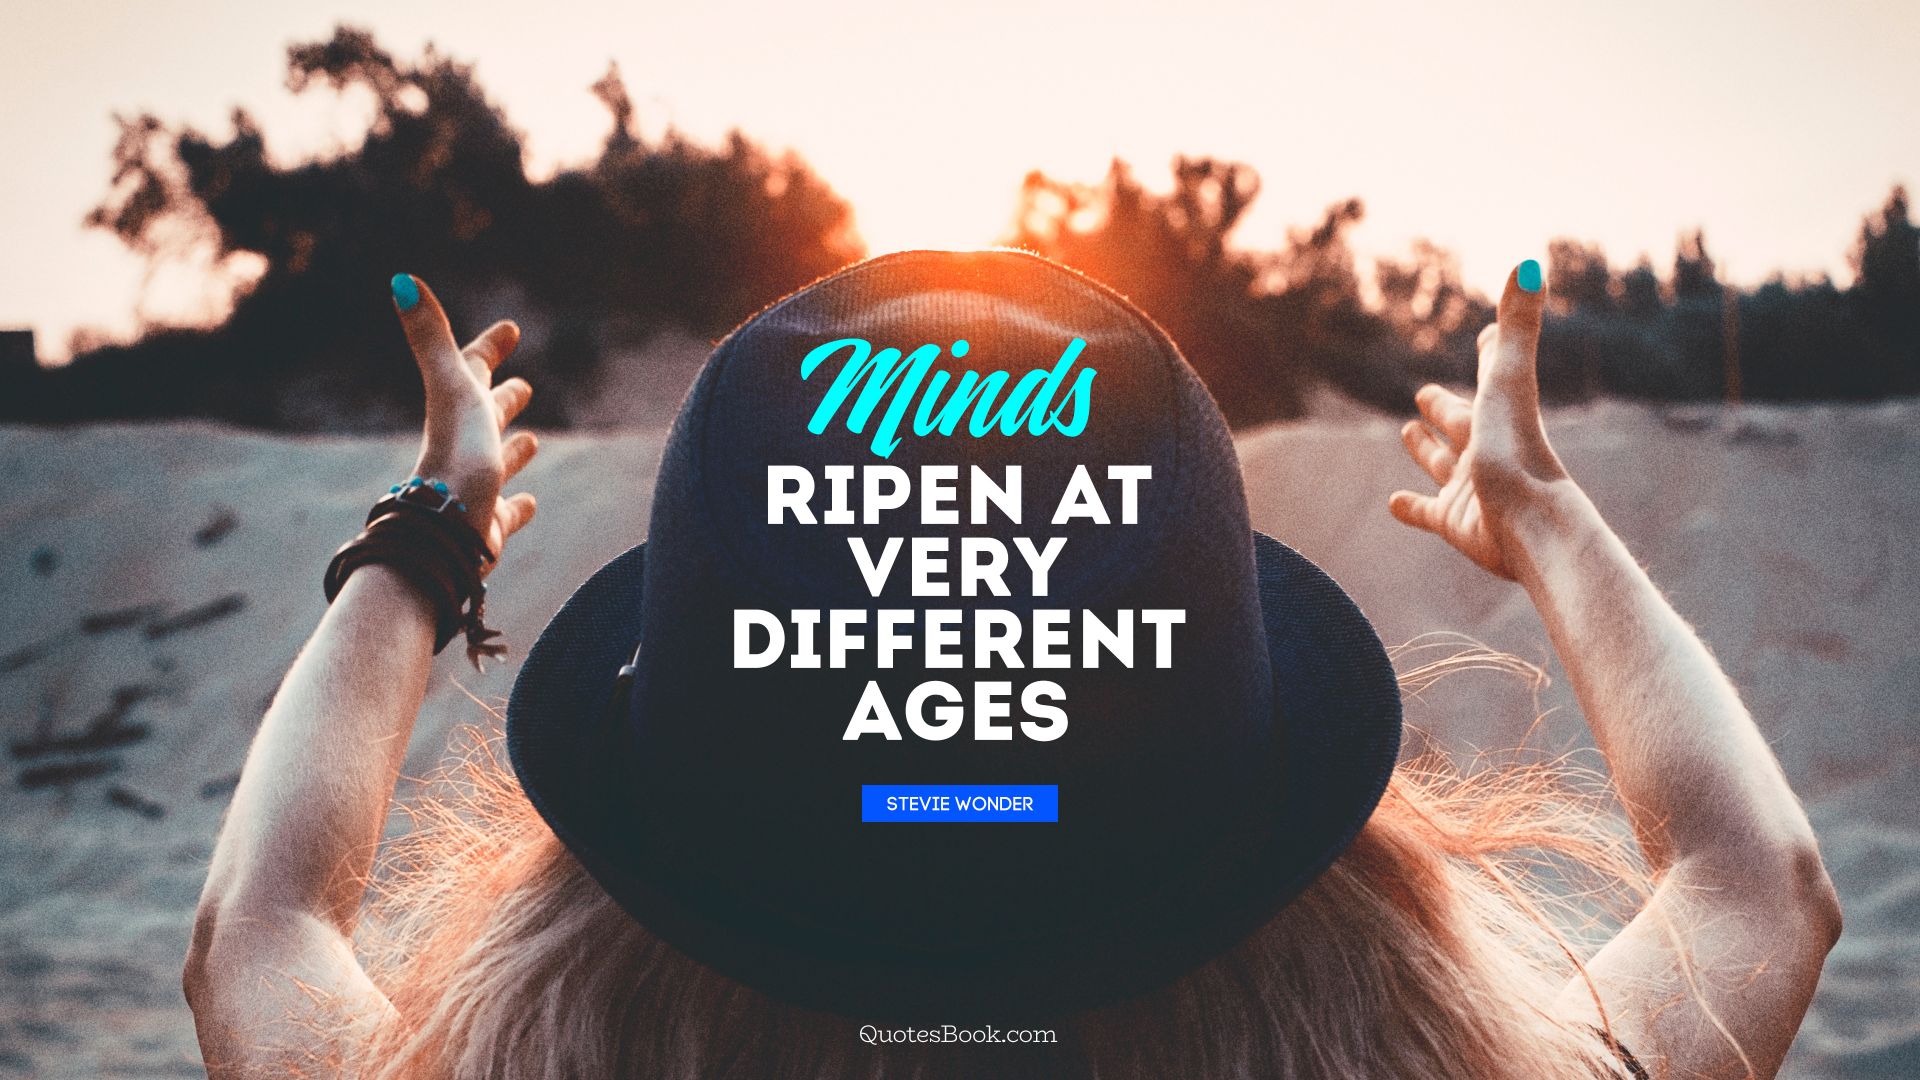 Minds ripen at very different ages. - Quote by Stevie Wonder